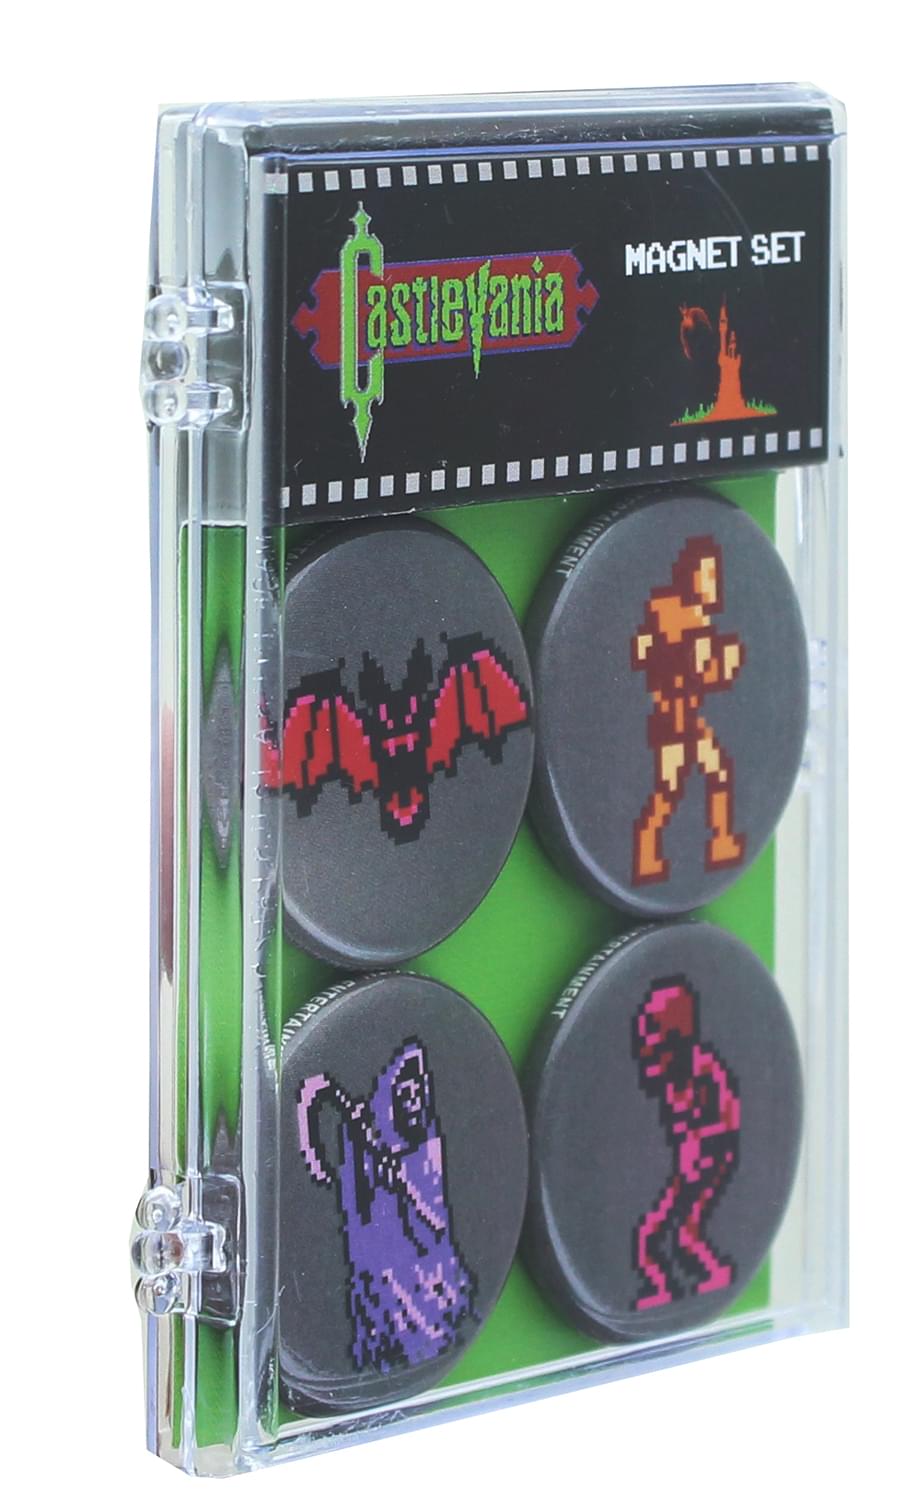 Castlevania Classic Video Game Magnet 4-Pack